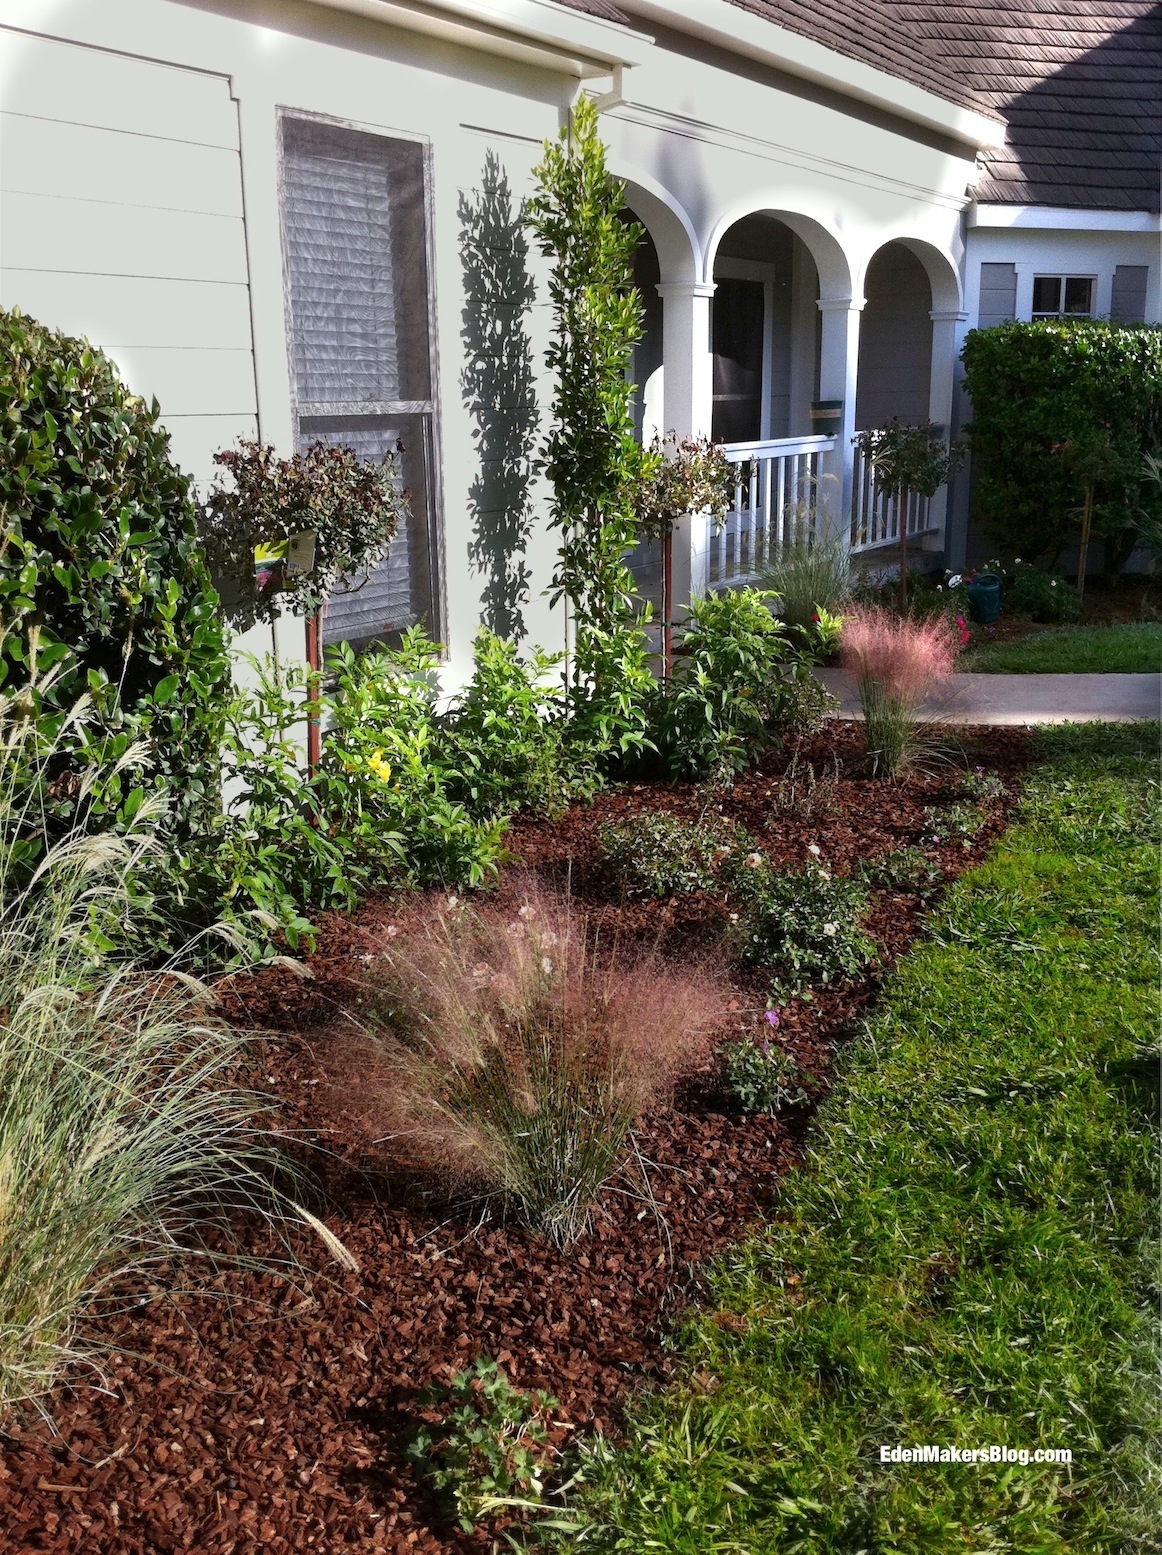 Regal-Mist-Muhlenbergia-Grass-Home-and-Family-Show-Yard